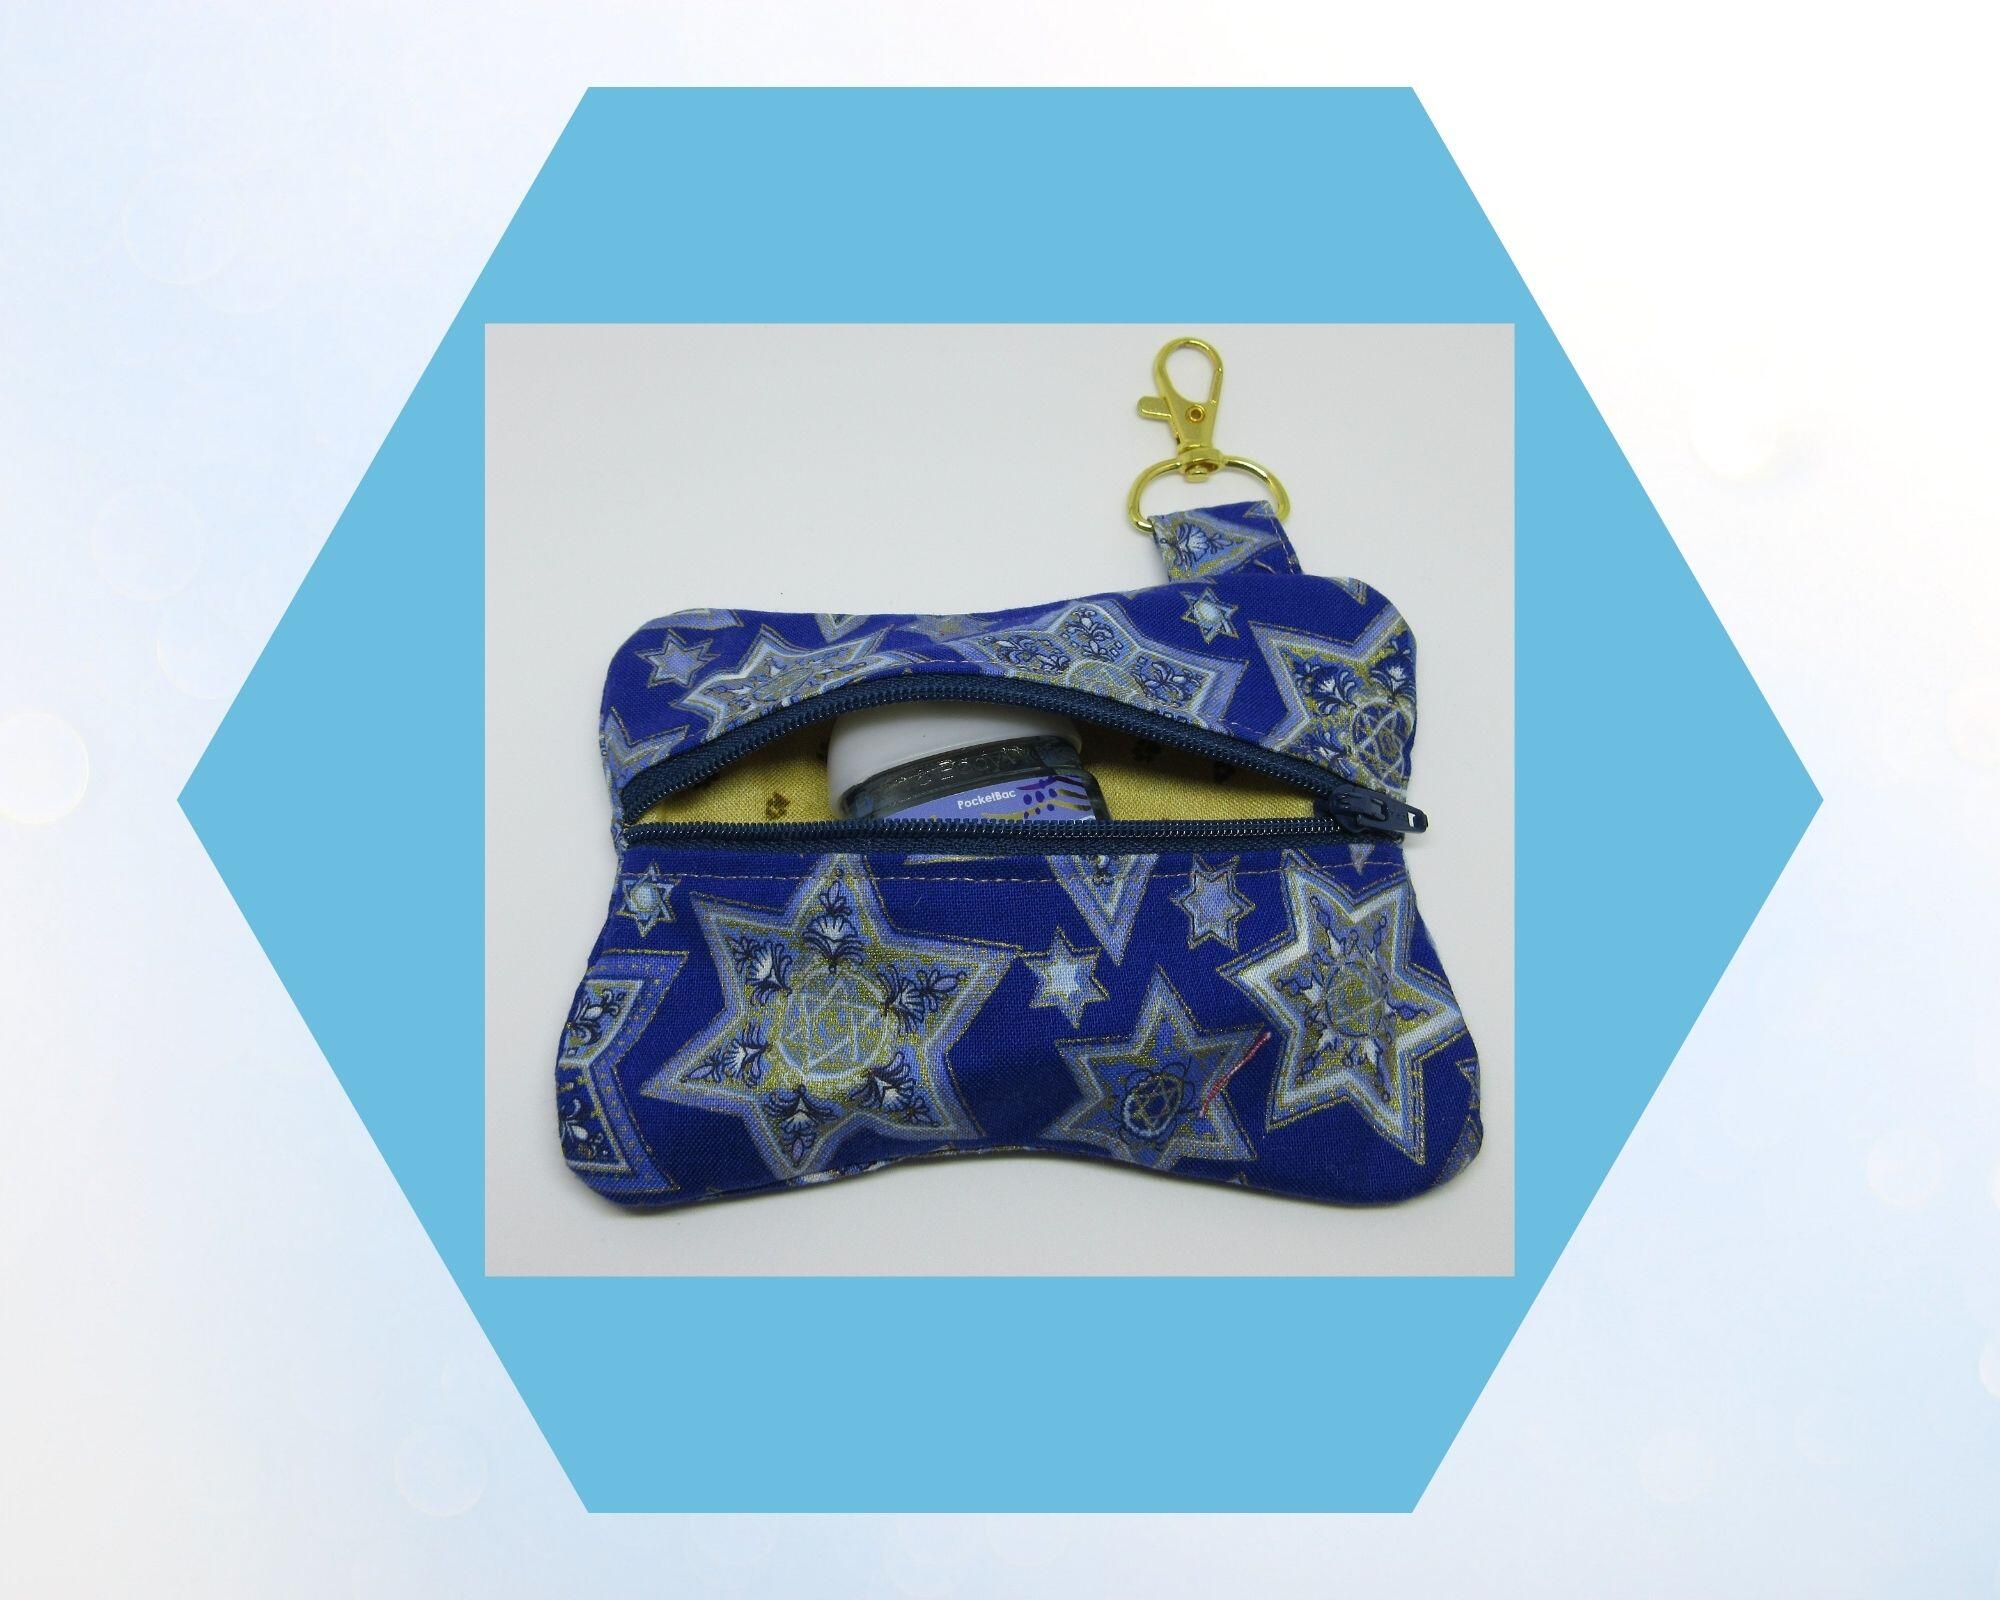 inside paw print pattern Jewish star 6 points blue and gold with gold tone hardware Multi purpose pouch Handmade by a Fur Baby Favorite dog poop bag holder waste bag dispenser training treat pouch binky pacifier bag change purse pouch